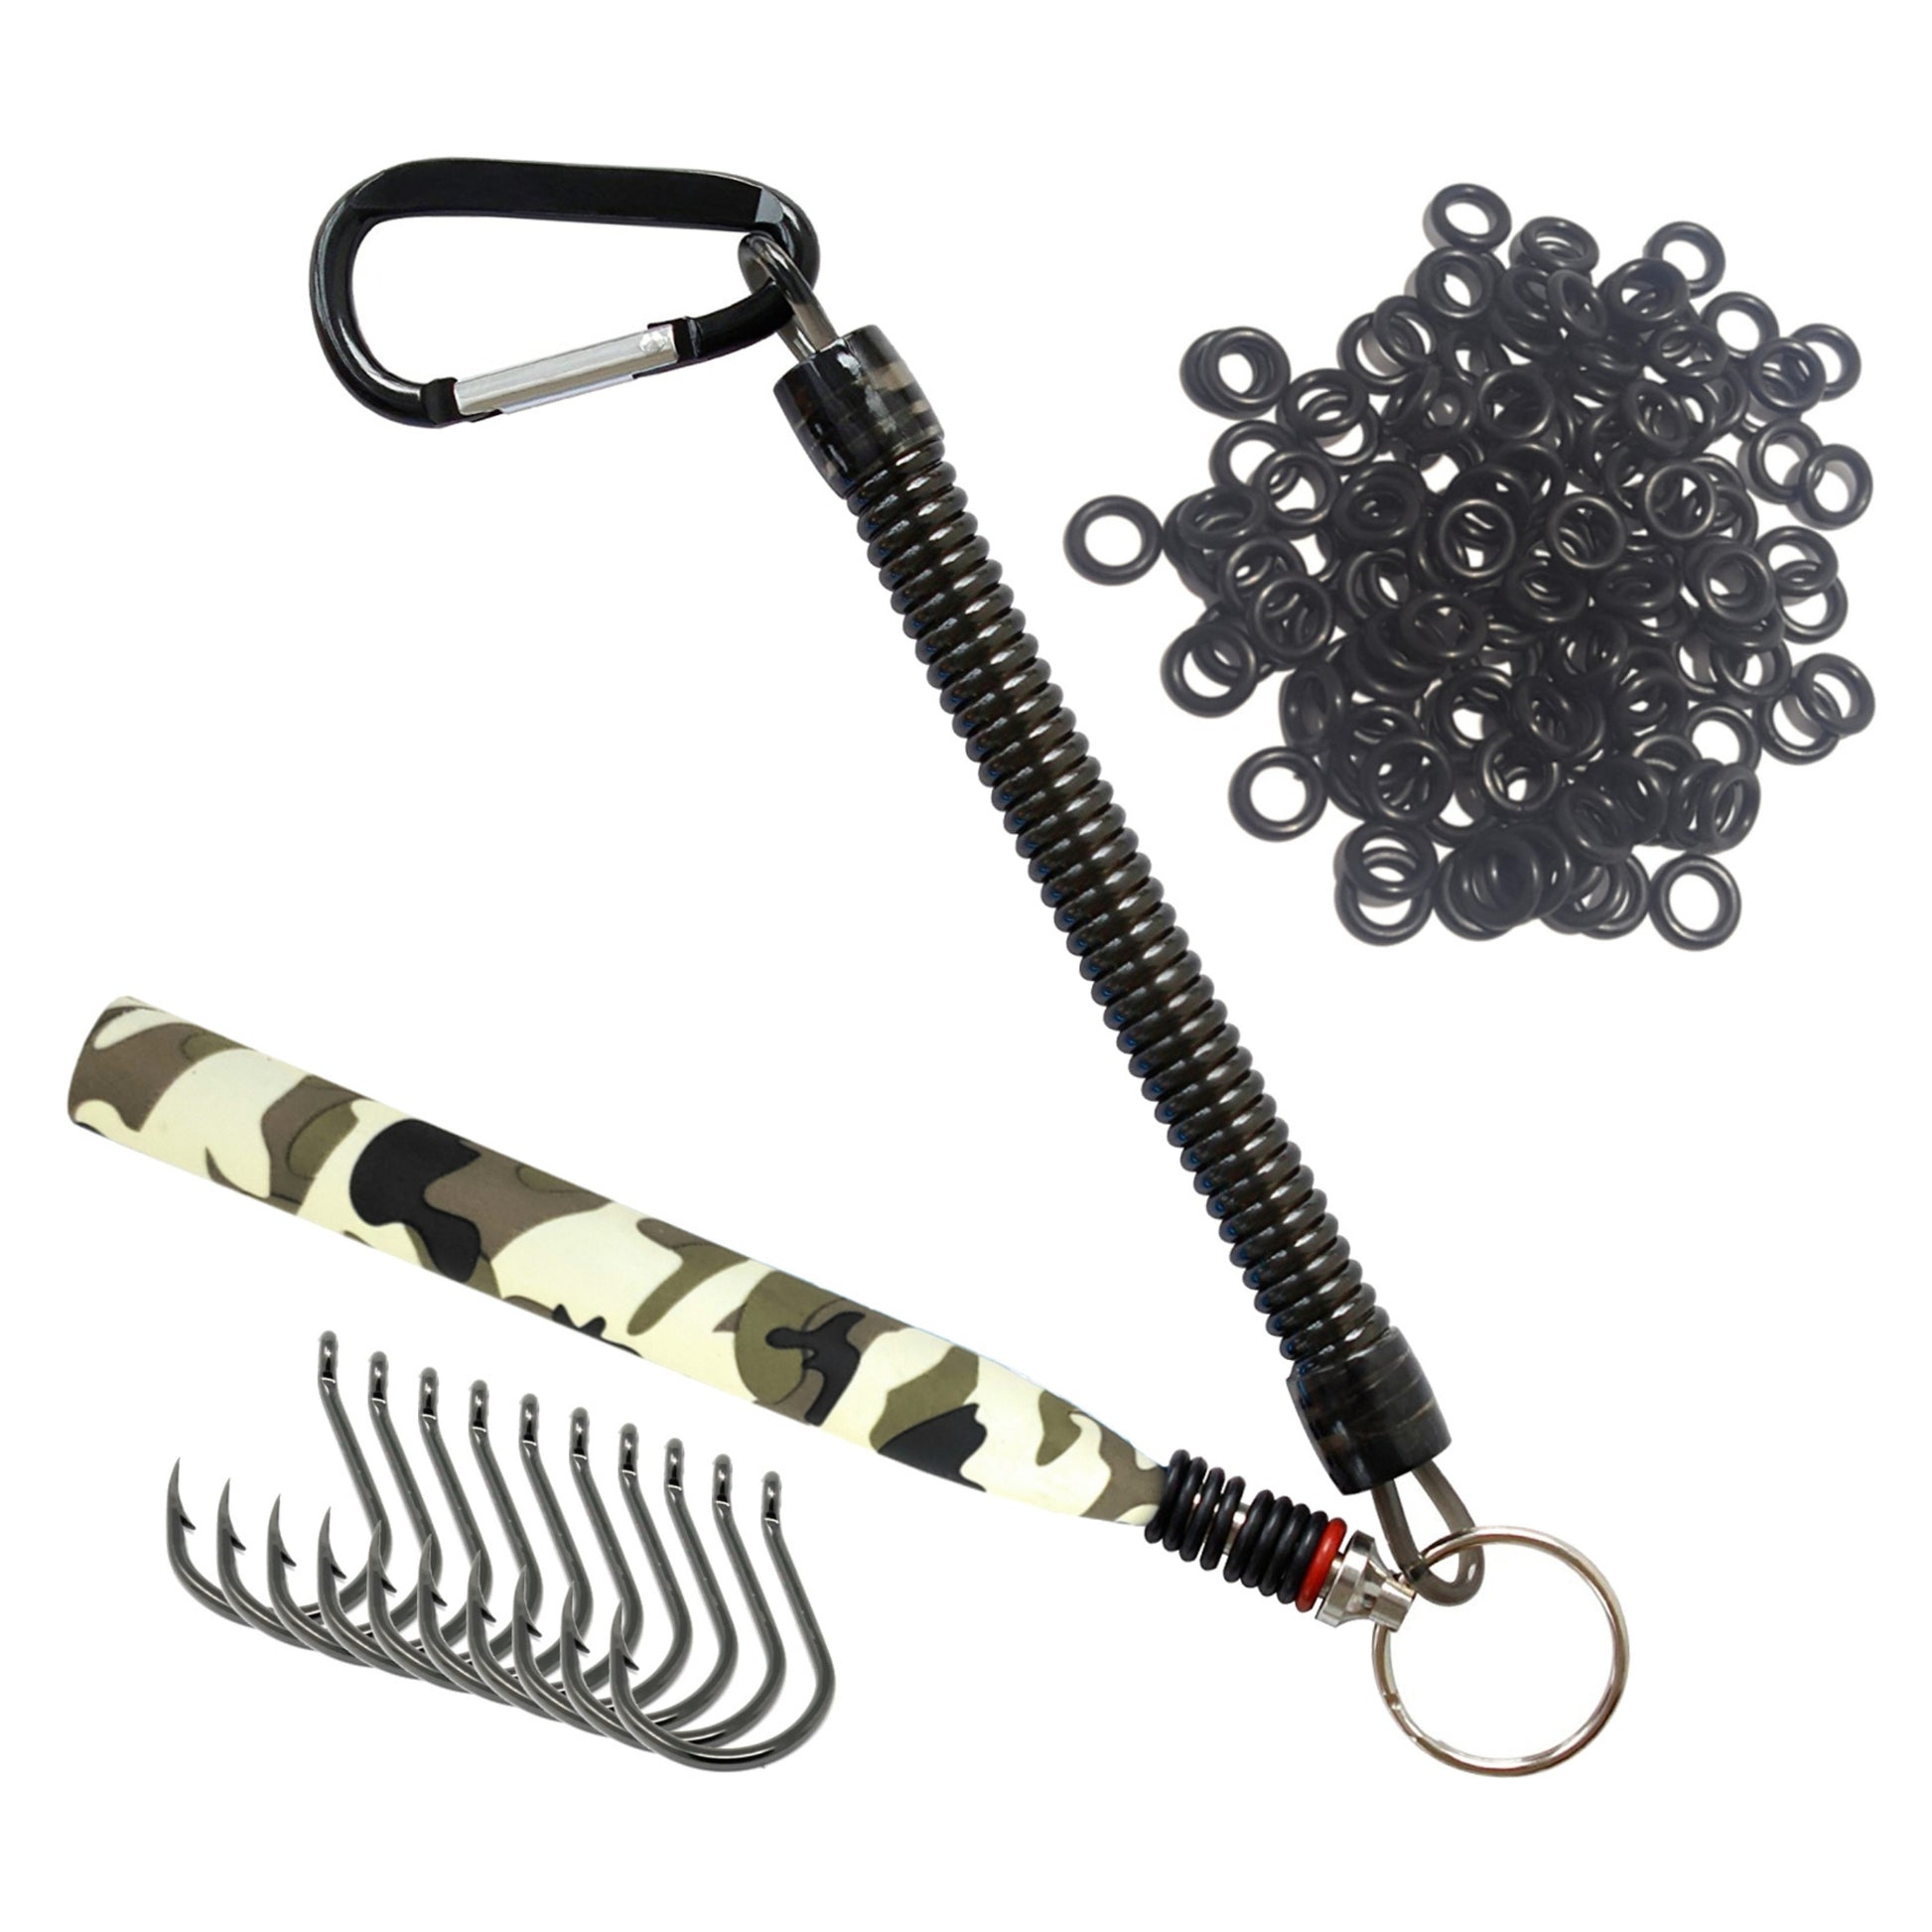 Wacky Tool Fishing Accessories for Sale, Boomstick Worm